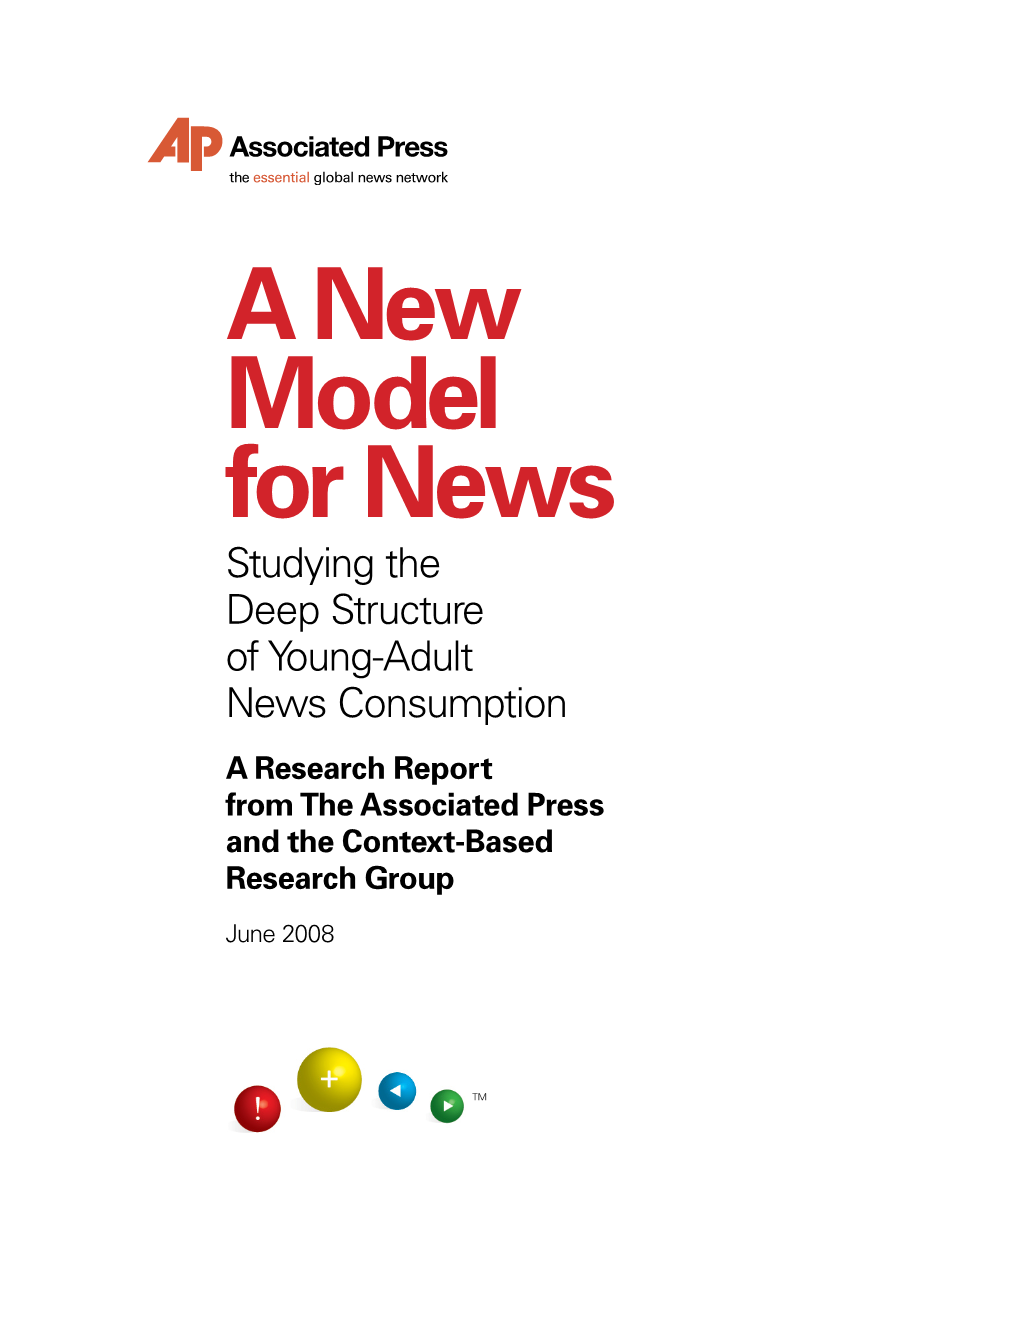 A New Model for News Studying the Deep Structure of Young-Adult News Consumption a Research Report from the Associated Press and the Context-Based Research Group